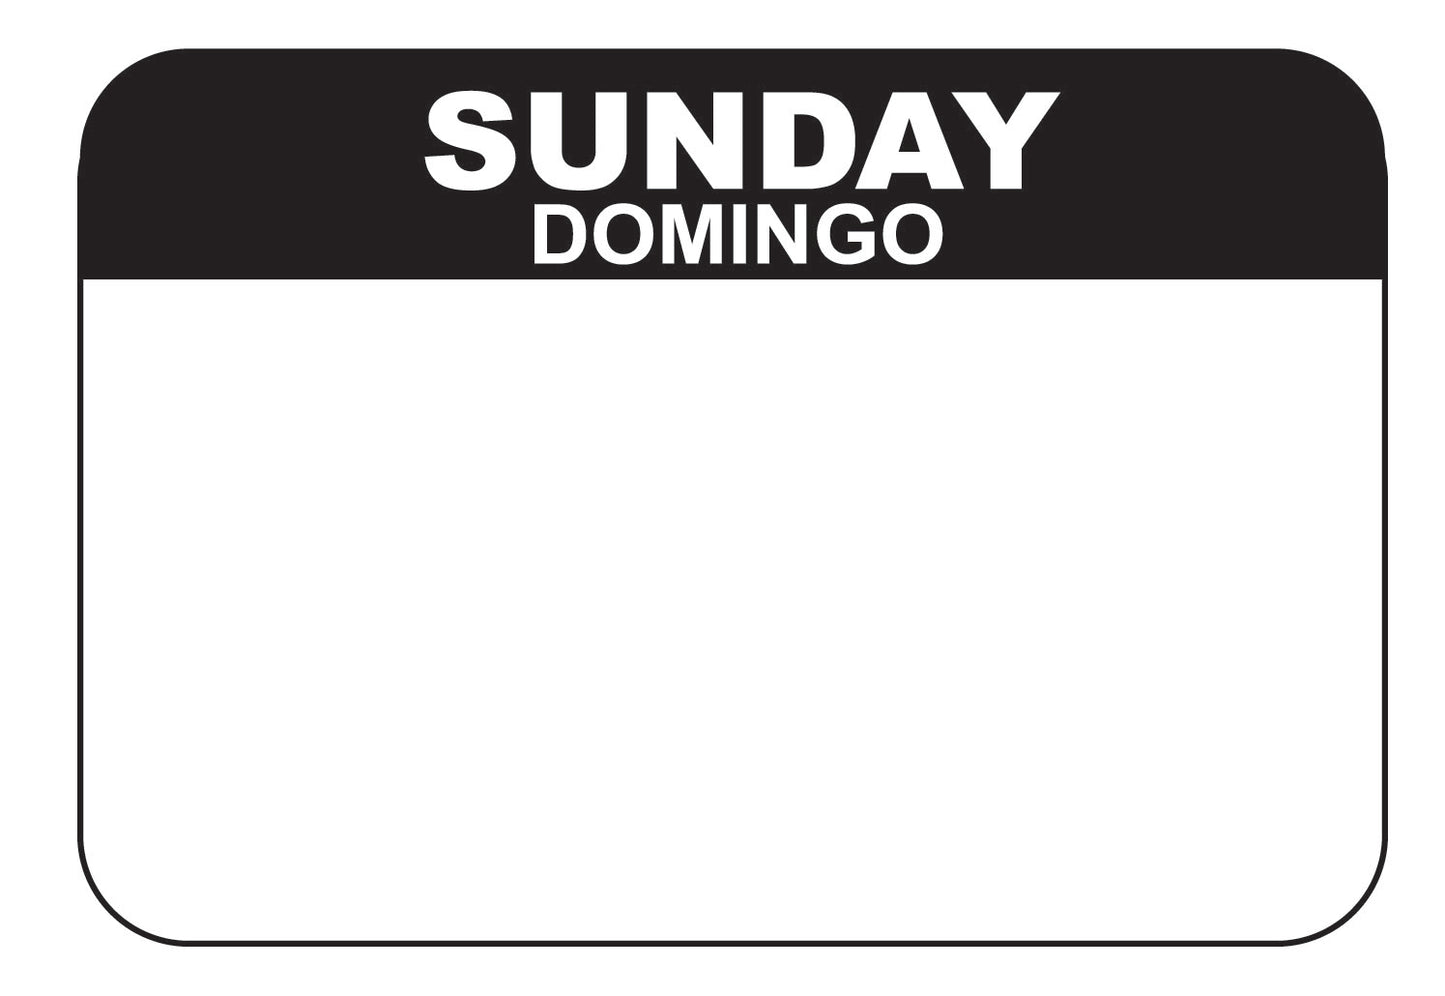 Sunday - Domingo 1" x 1.5" Dissolvable Day of the Week Date Label